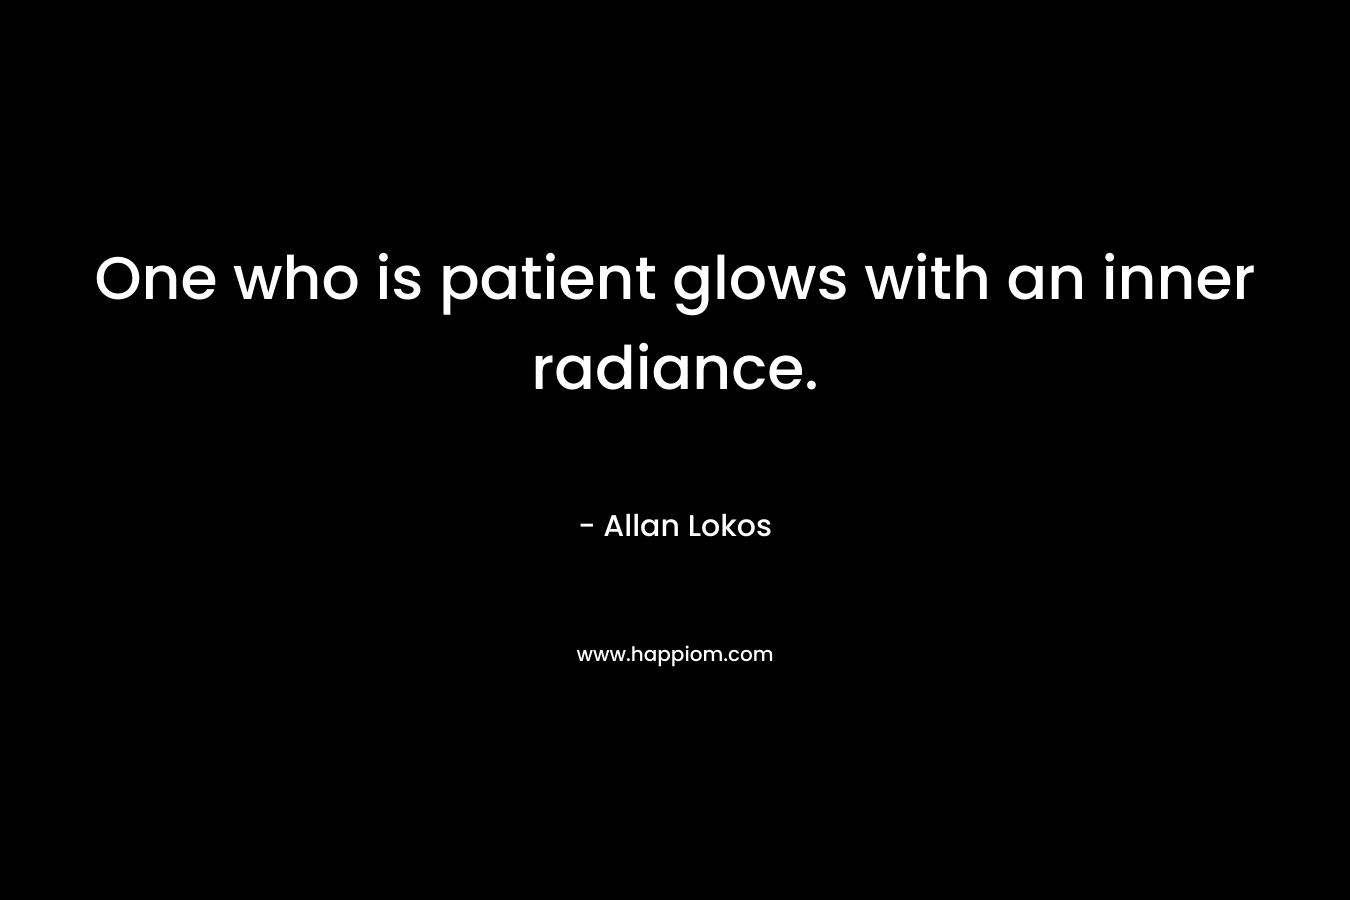 One who is patient glows with an inner radiance. – Allan Lokos